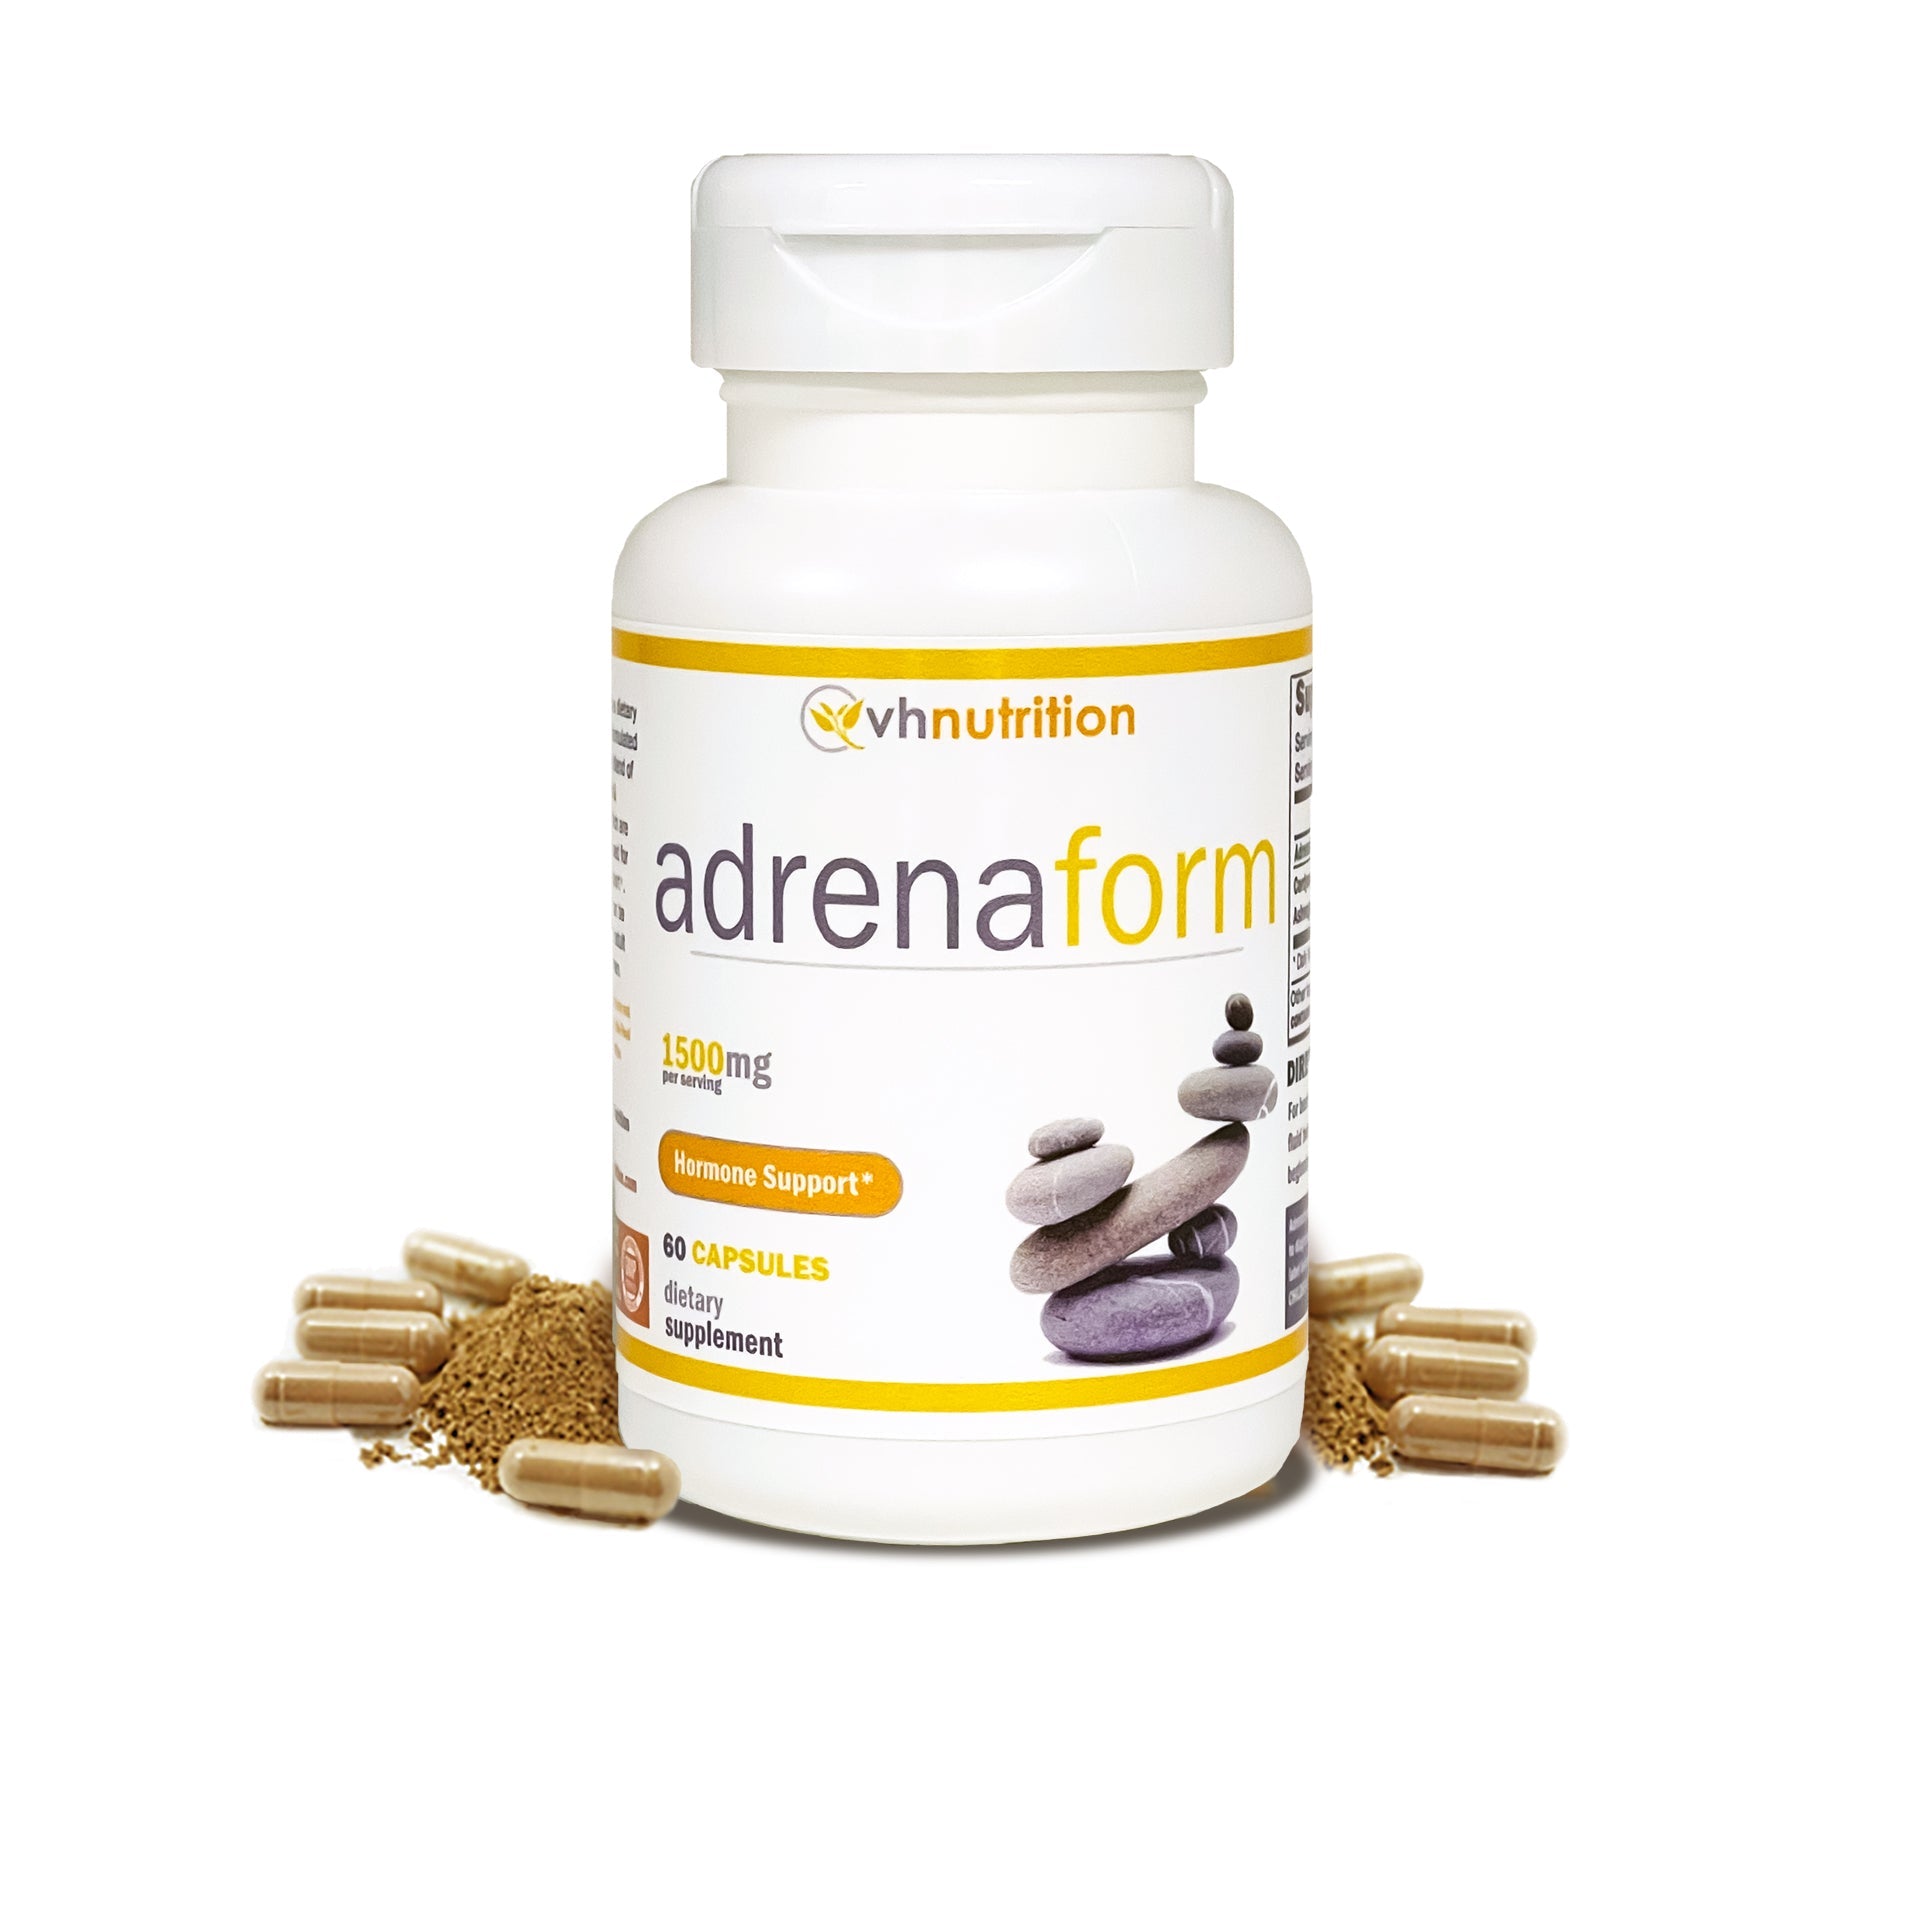 VH Nutrition ADRENAFORM | Adrenal Support* Supplement | Maximum Strength Hormone Support* for Men and Women | Rhodiola, Cordyceps, and Eleuthero | 60 Capsules